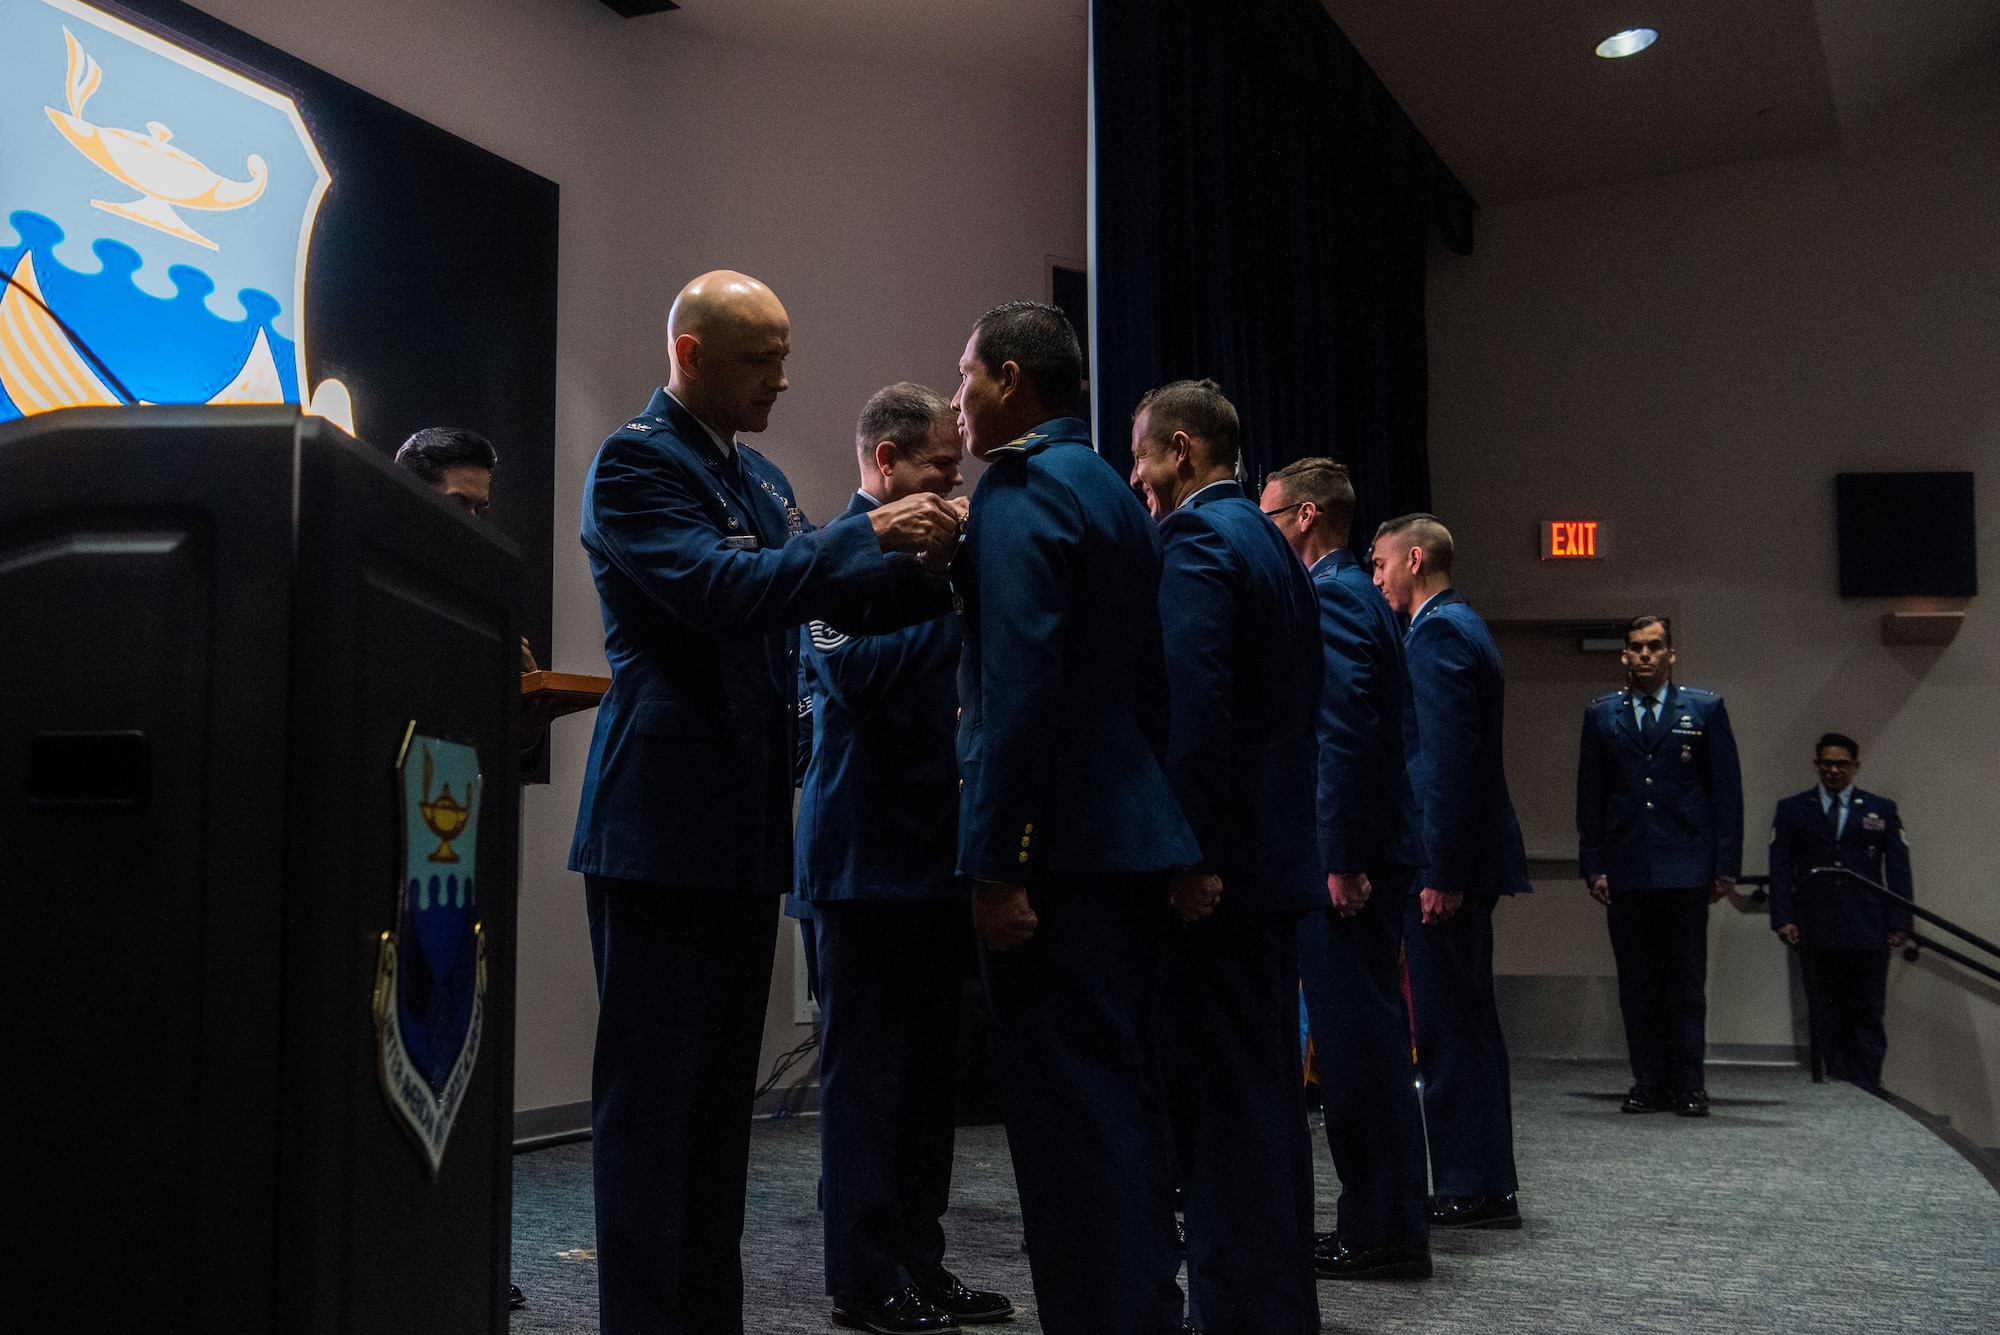 Col. José Jiménez, Jr., commandant of the Inter-American Air Forces Academy, pins international military student during IAAFA’s graduation banquet and 80th anniversary celebration, at San Antonio, Texas, April 26, 2023. More than 60 international military students from seven partner nations and the USAF graduated during the first training cycle of 2023. IAAFA provides instruction in professional military education and leadership, aircrew training and technical courses – all in Spanish. (U.S. Air Force photo by Vanessa R. Adame)